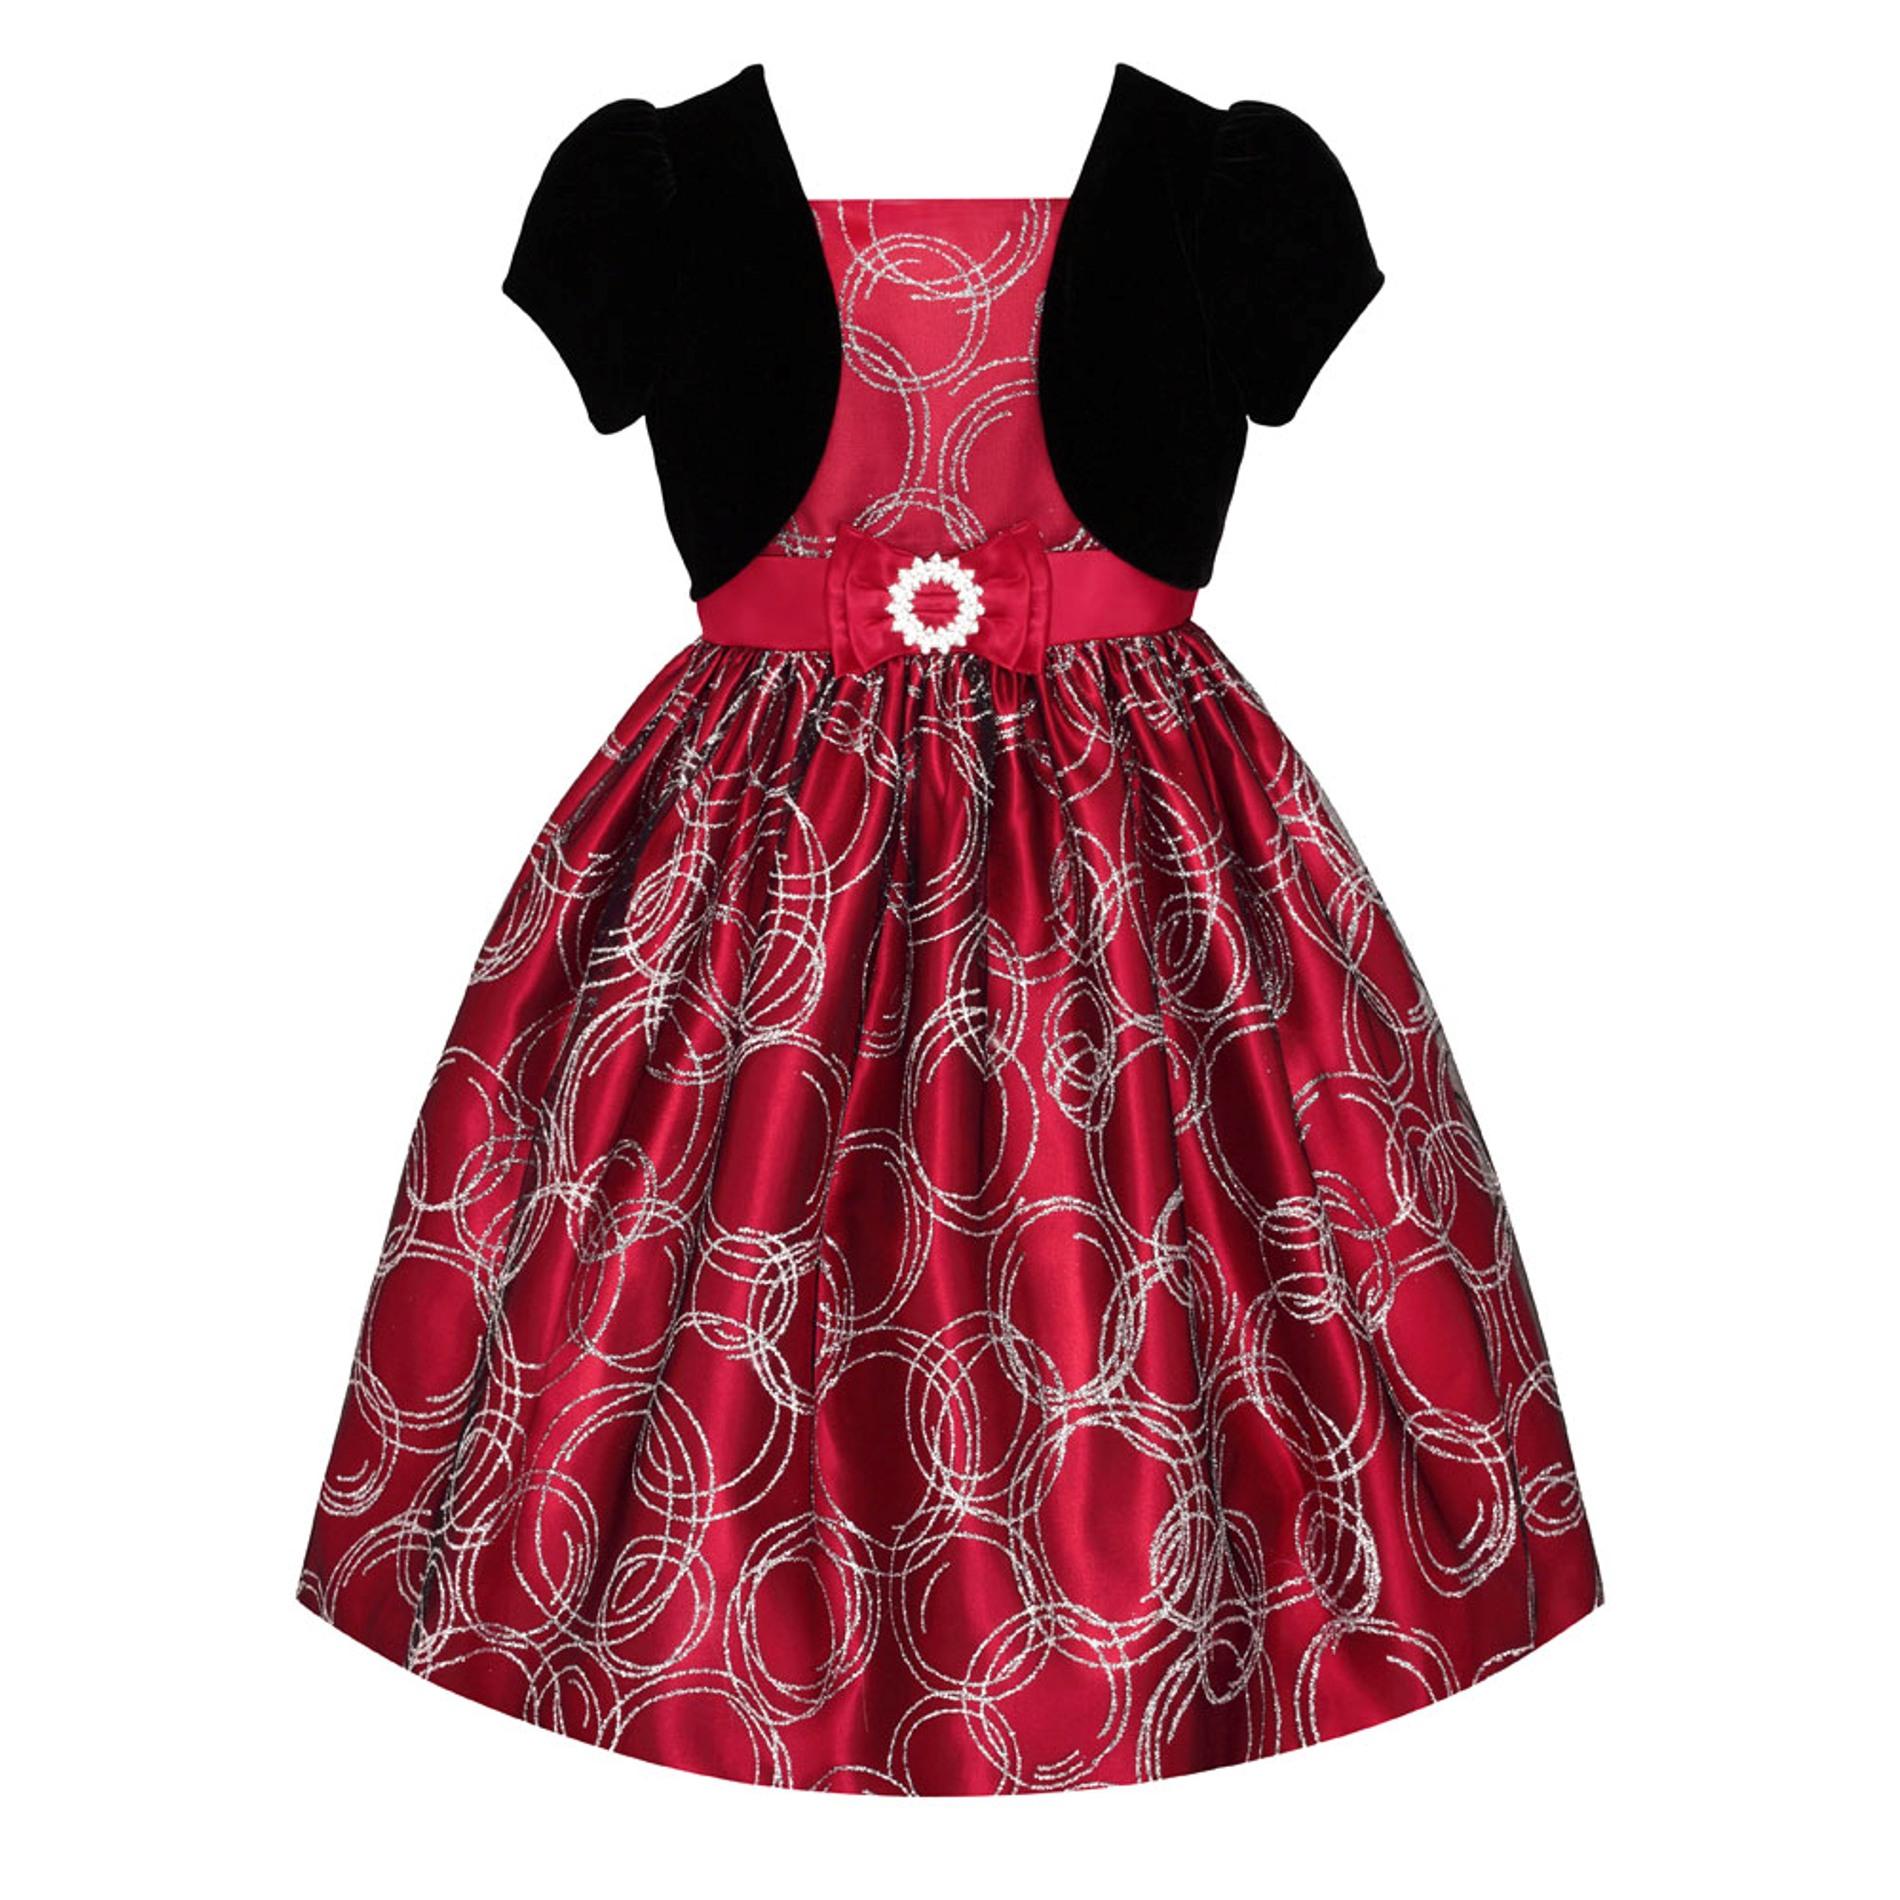 Love Girl's Layered-Look Party Dress - Bubbles